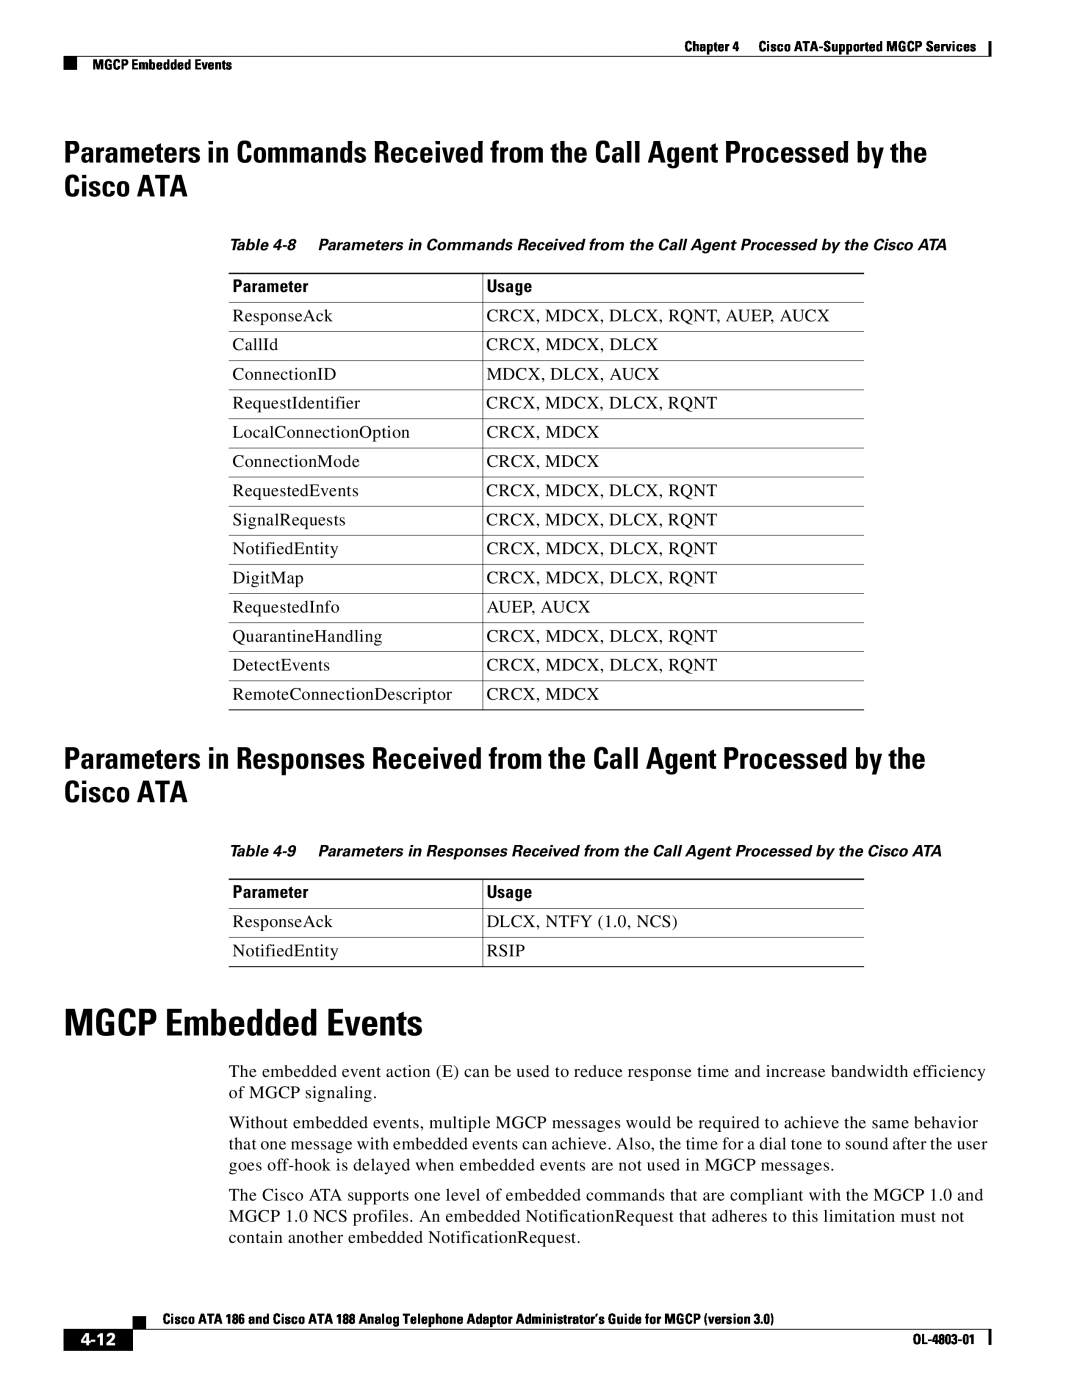 Cisco Systems ATA 186 manual MGCP Embedded Events 